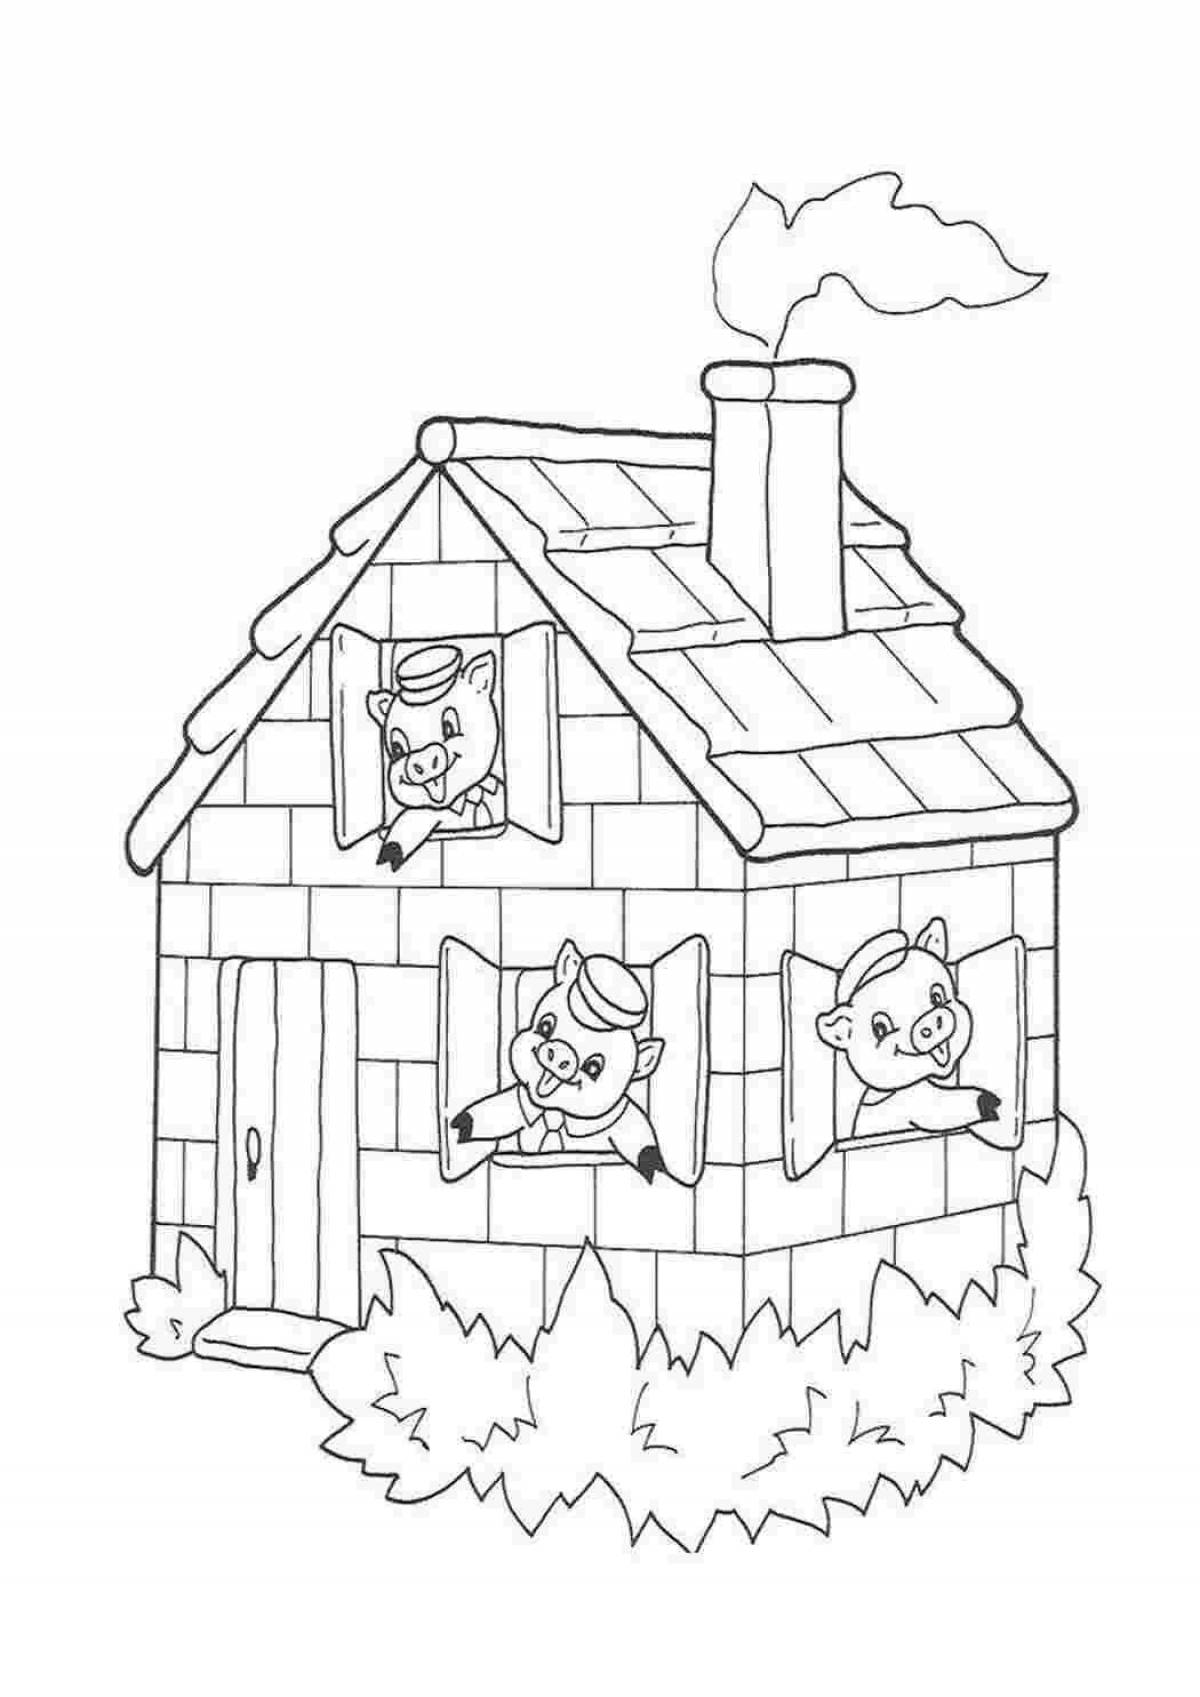 Three little pigs with houses #3